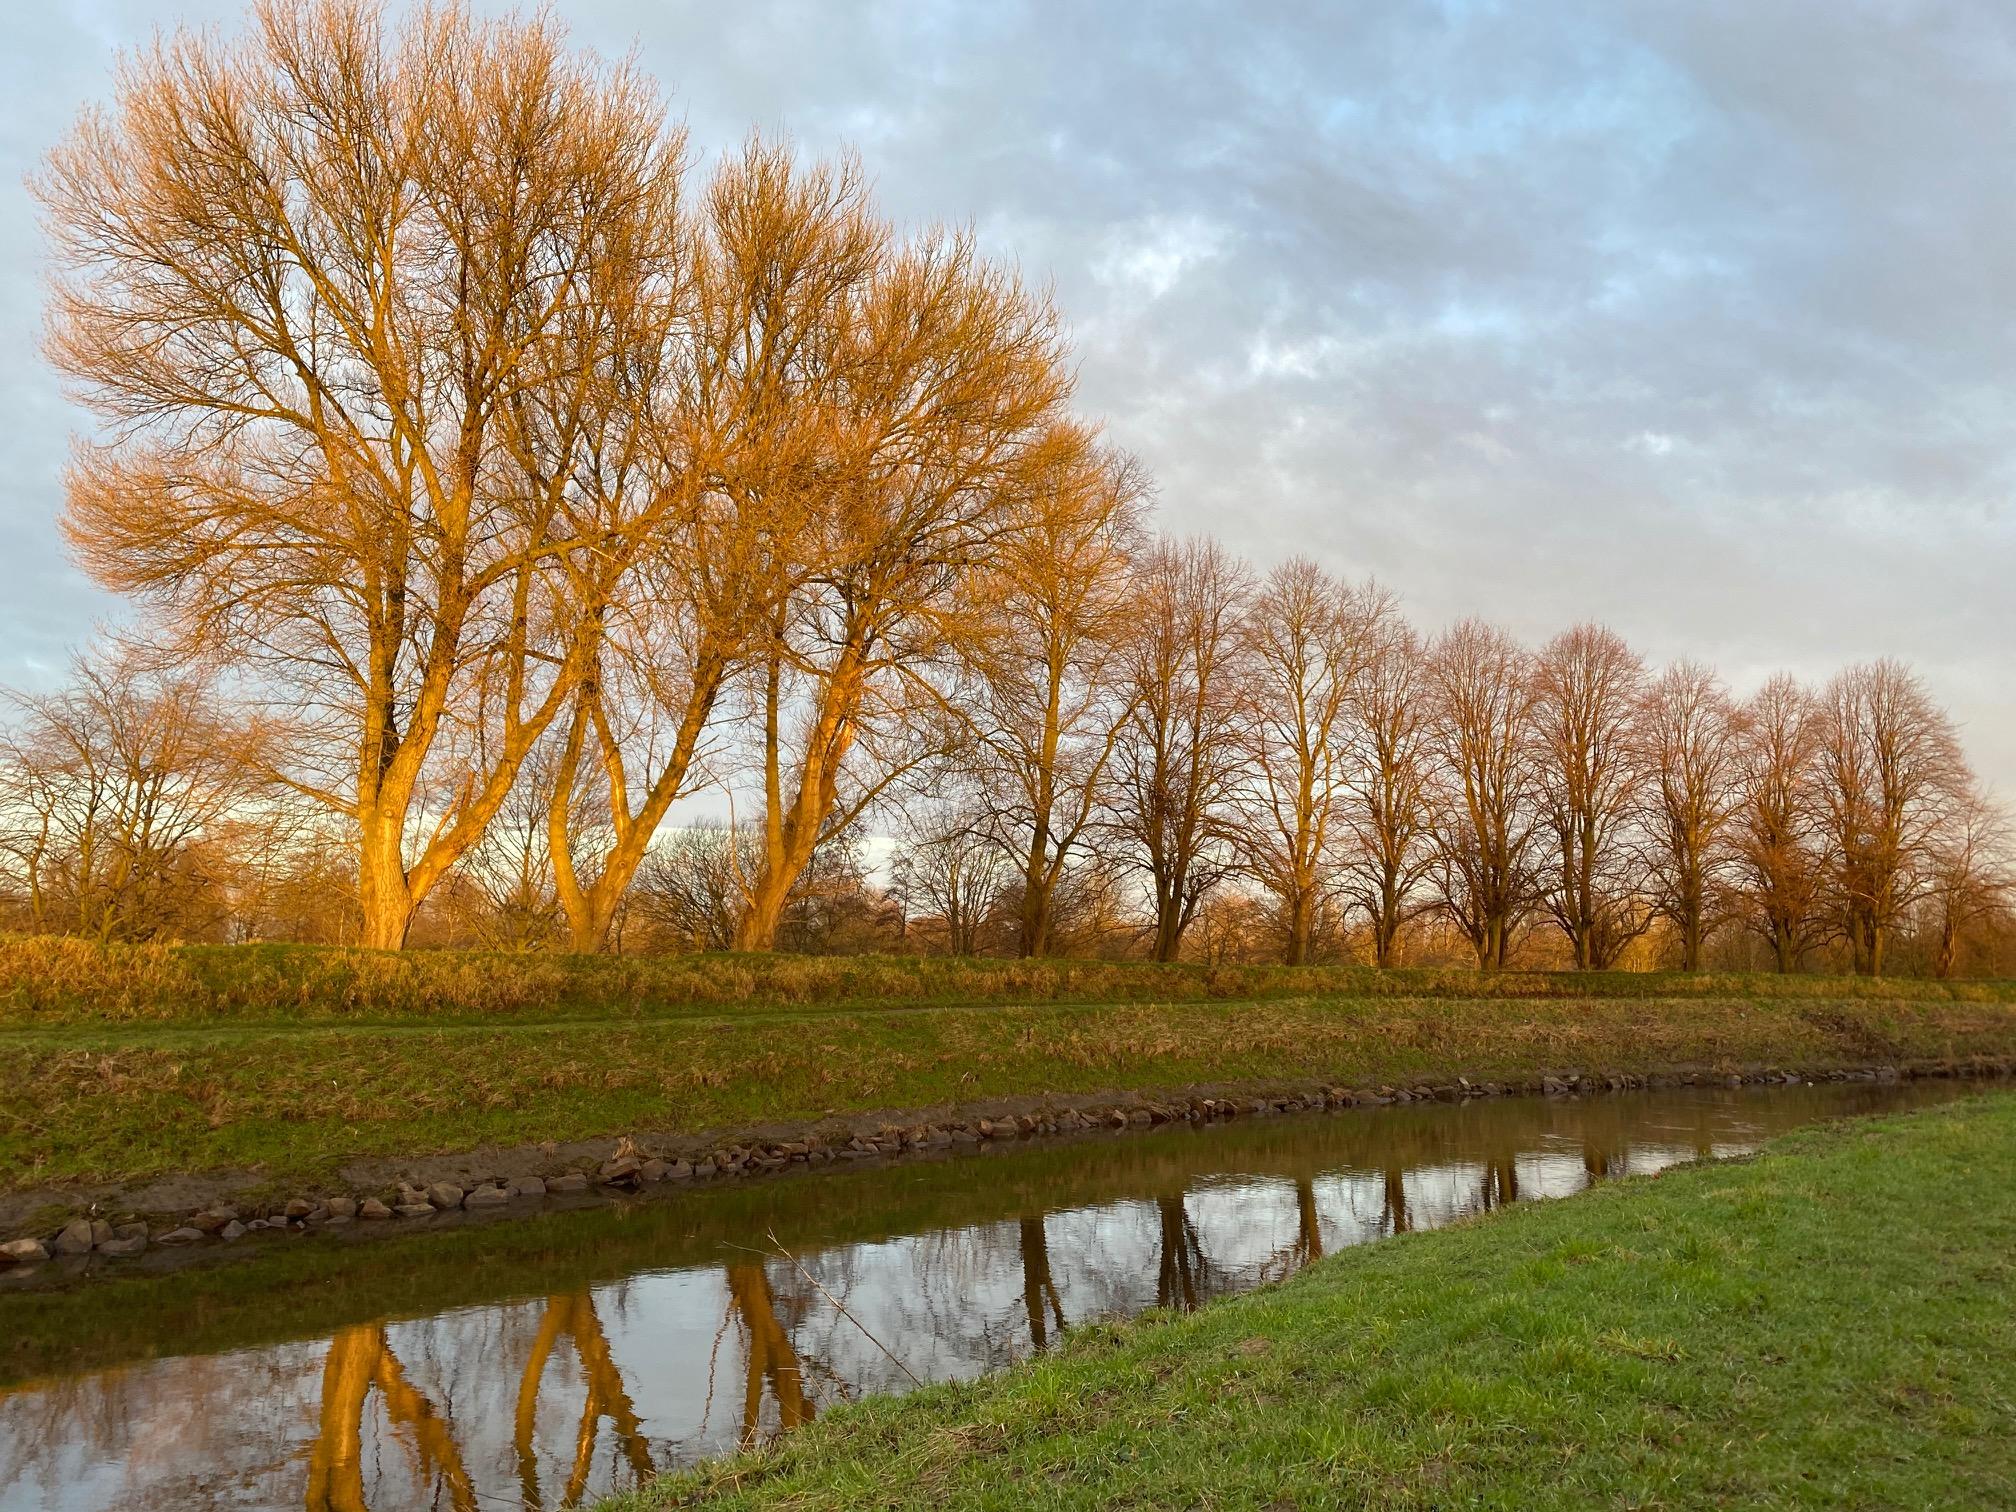 A row of trees along a canal bank